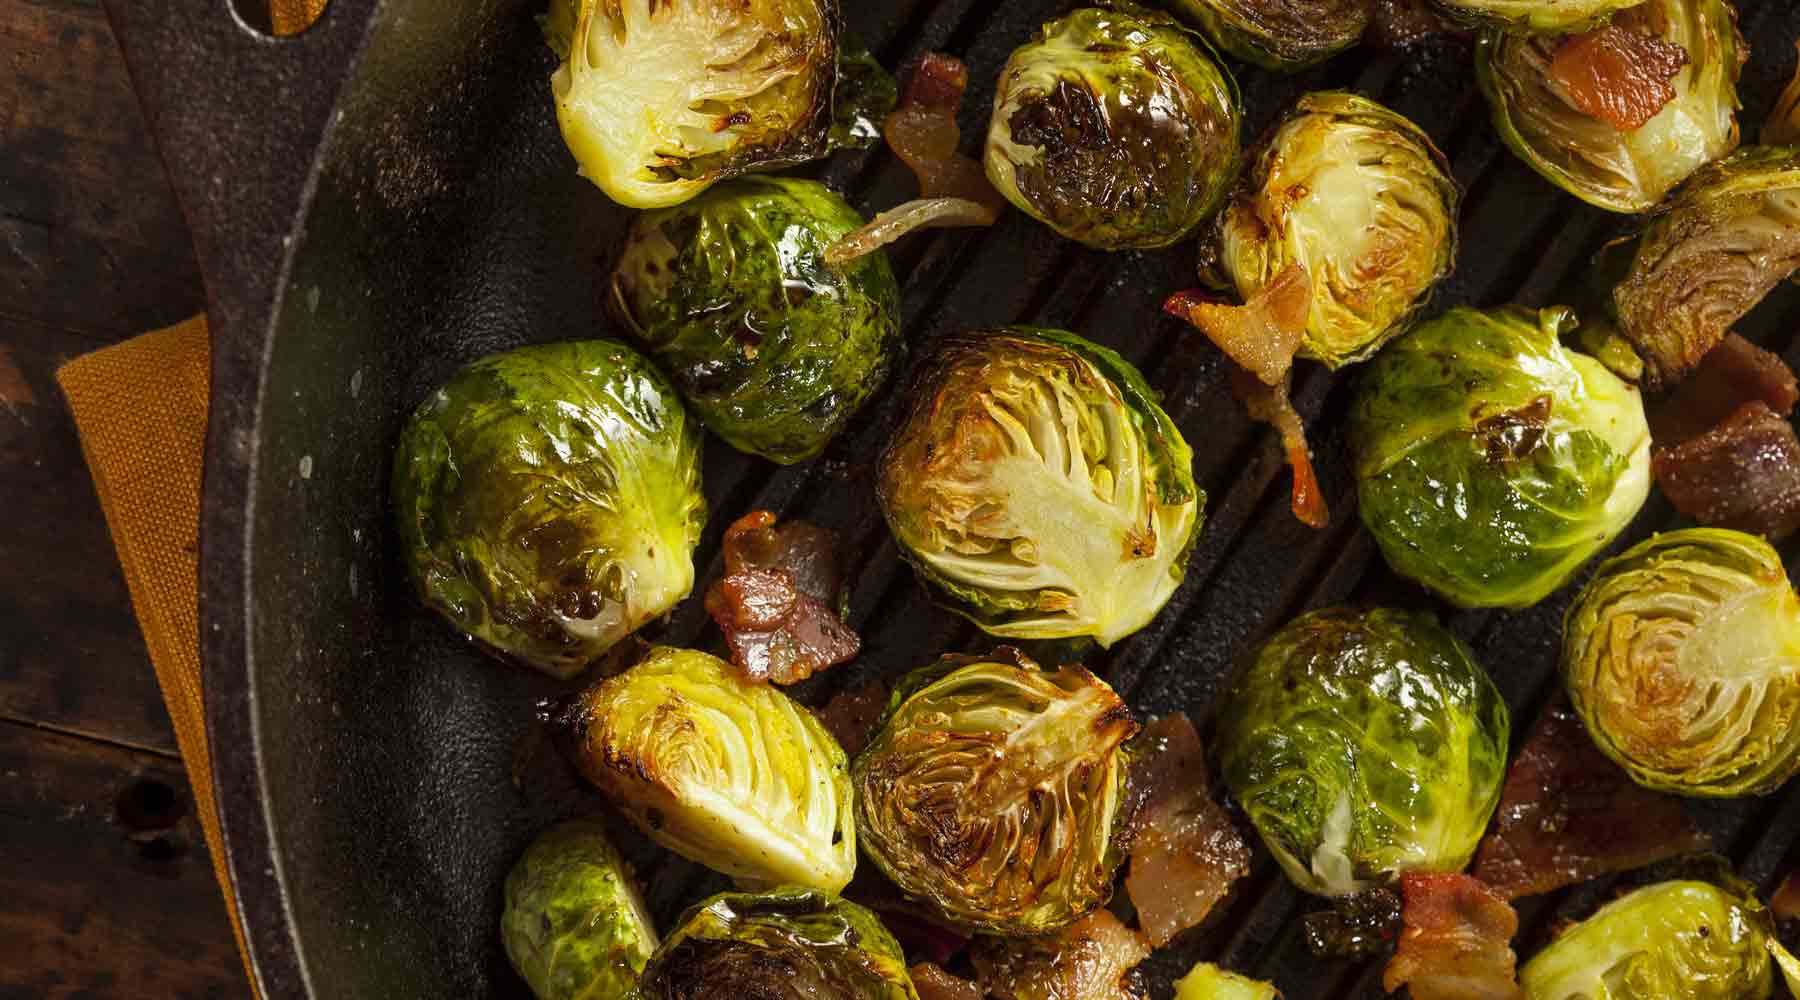 Baked Brussel Sprouts